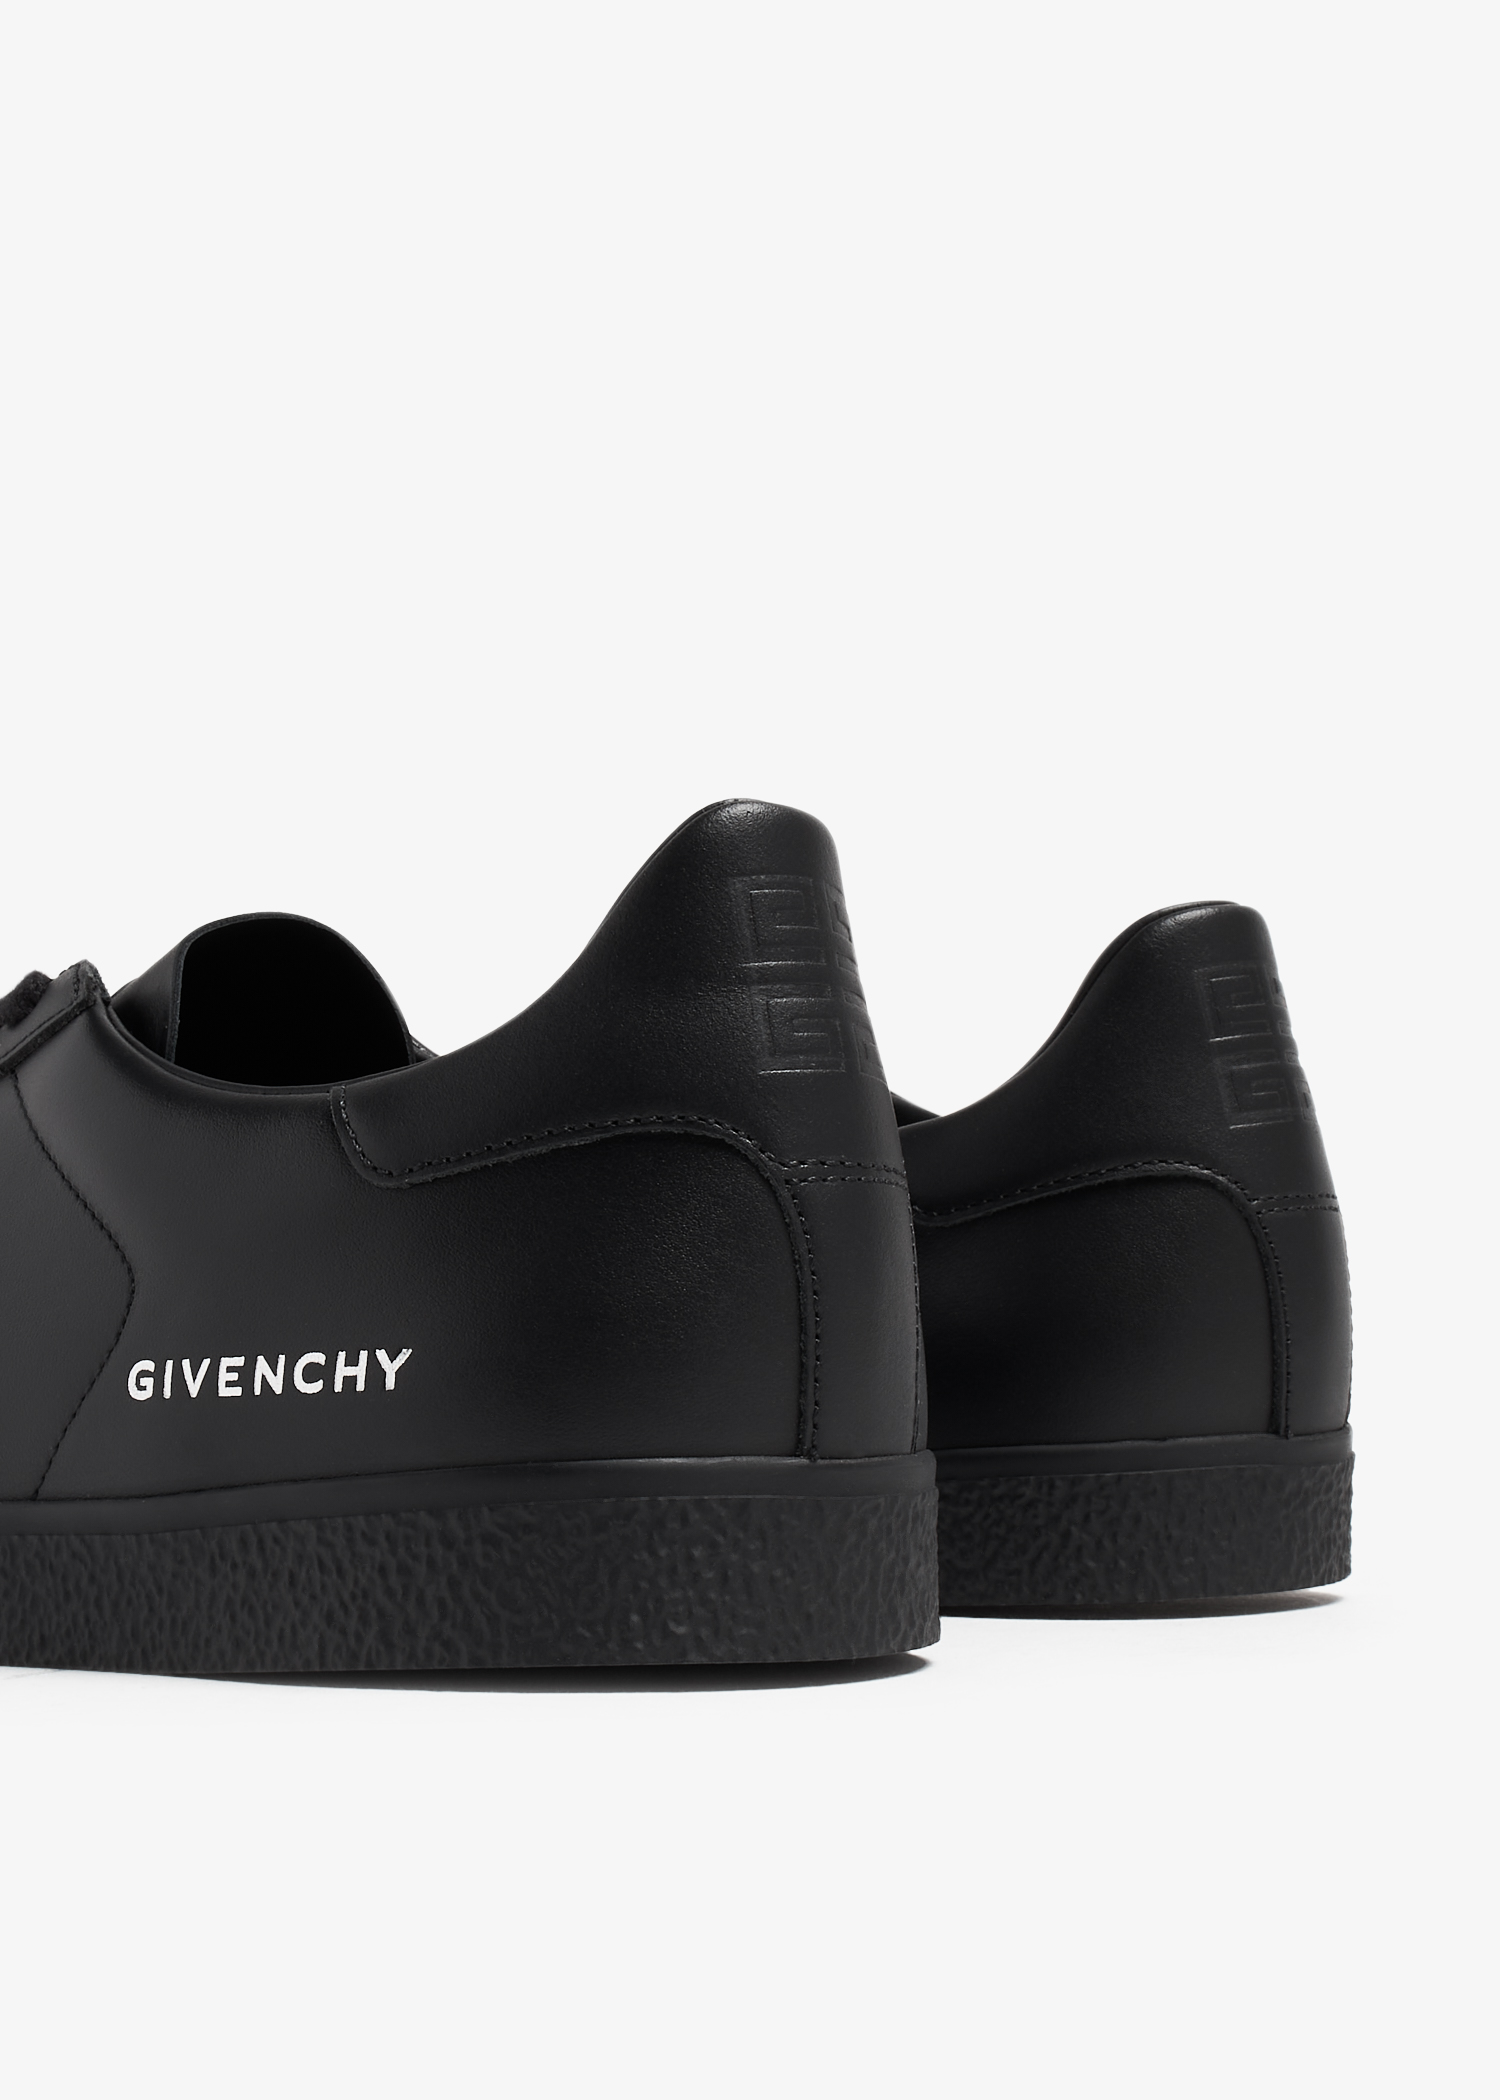 GIVENCHY Sneakers 20+ Items. Shop Online in New York and LA. GIVENCHY  Women's Catalog: Prices, Photos.